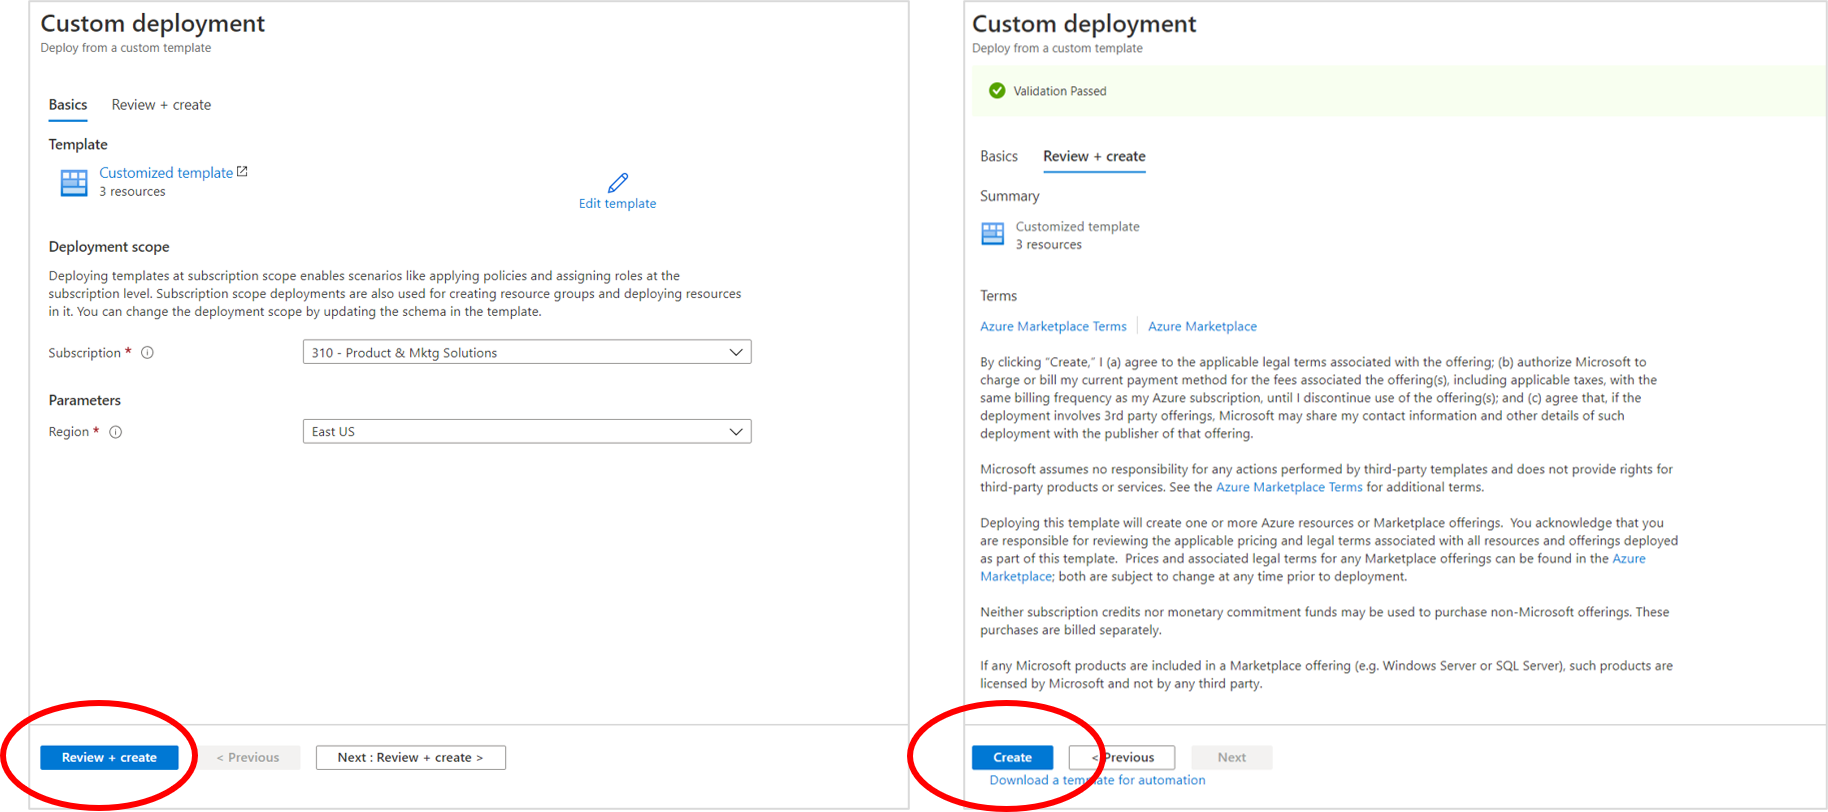 The Azure resource template will be in the form of a custom deployment template